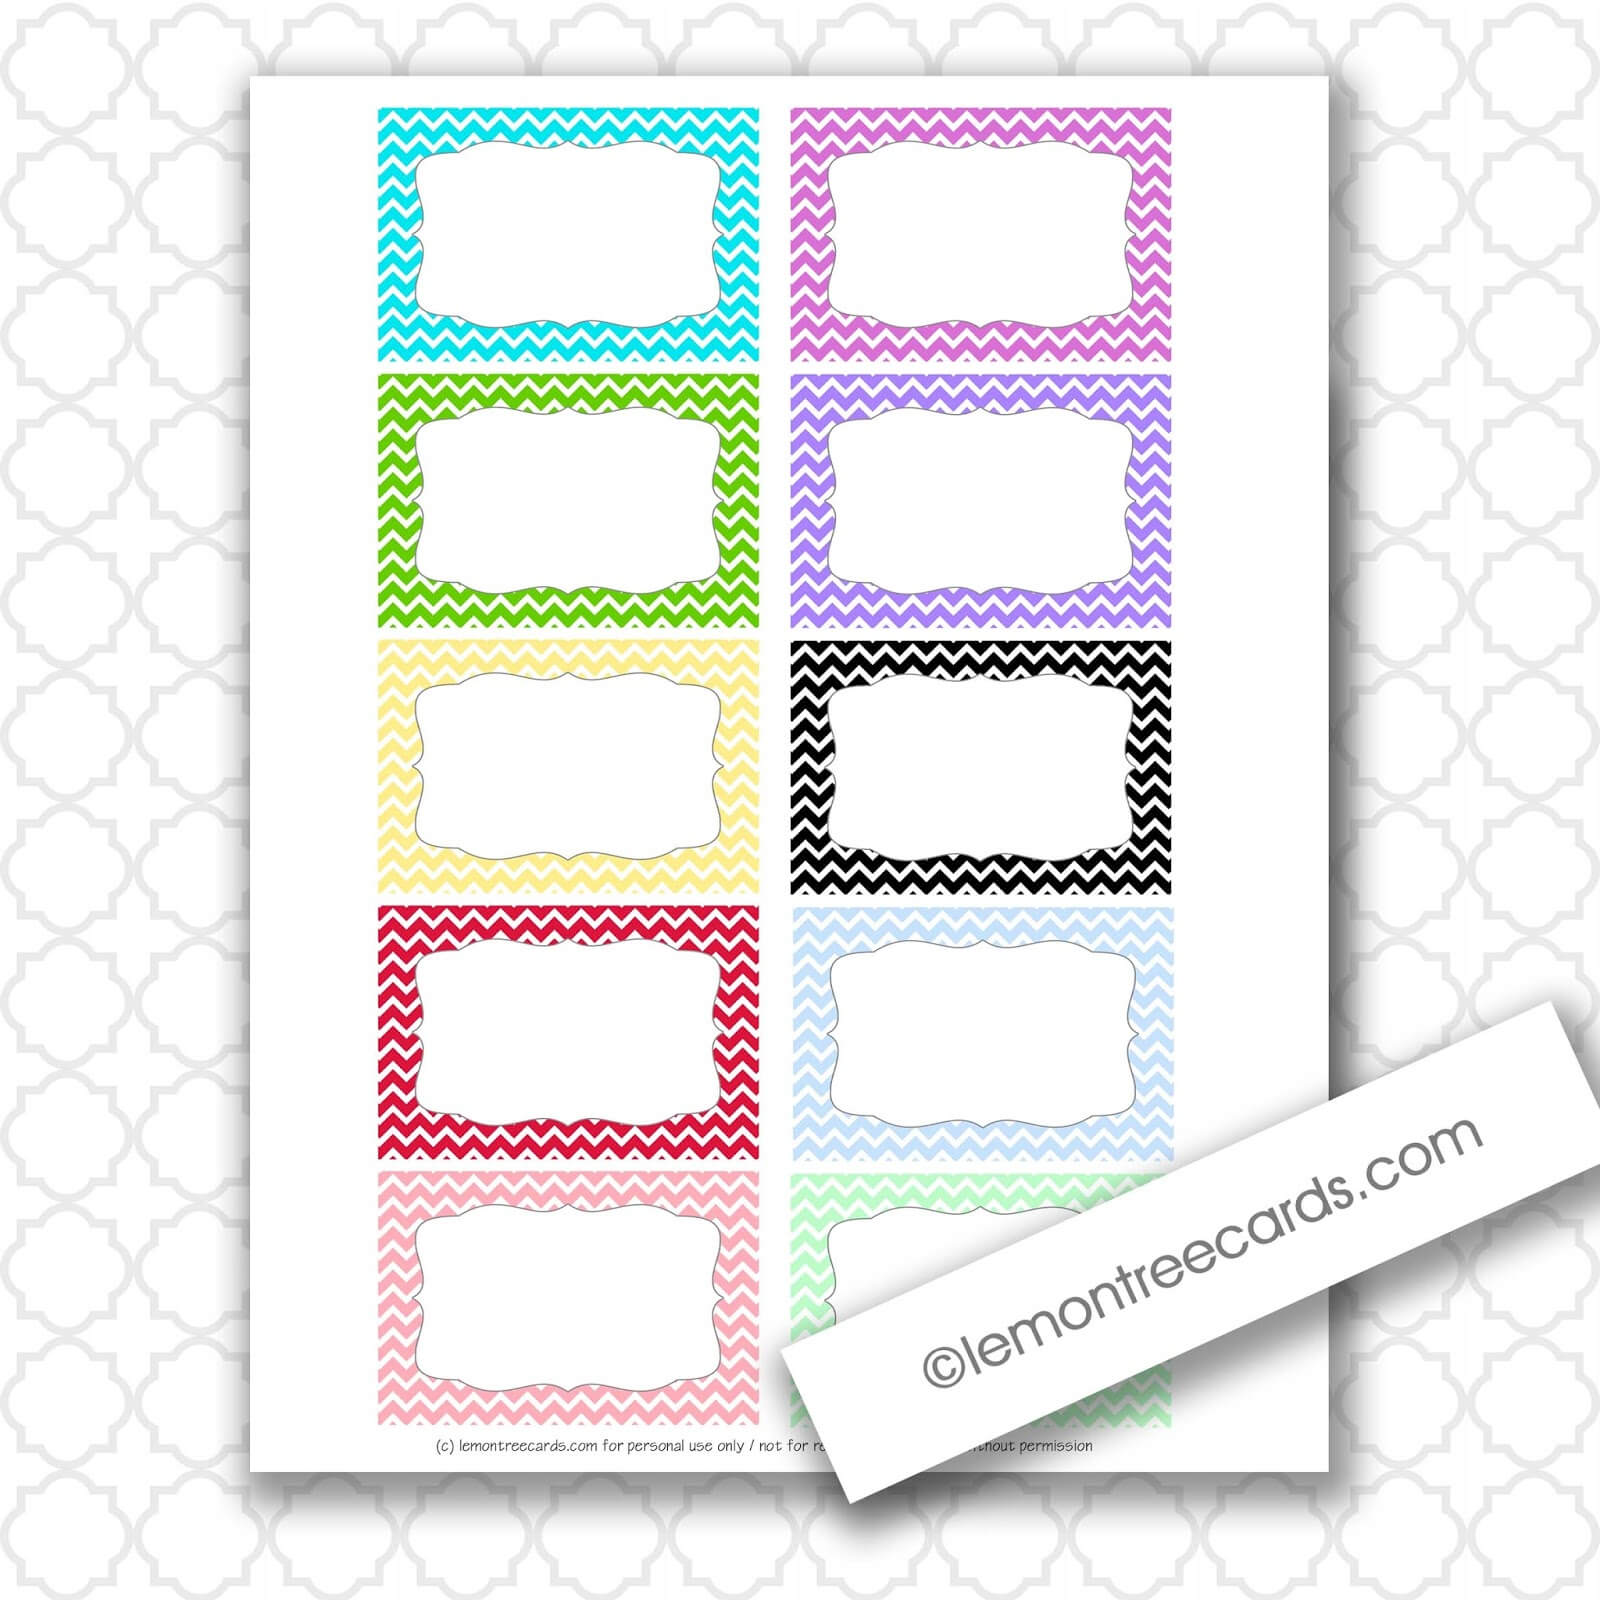 28+ [ Index Card Template 4X6 ] | 8 Best Images Of 4X6 Index Regarding Blank Index Card Template